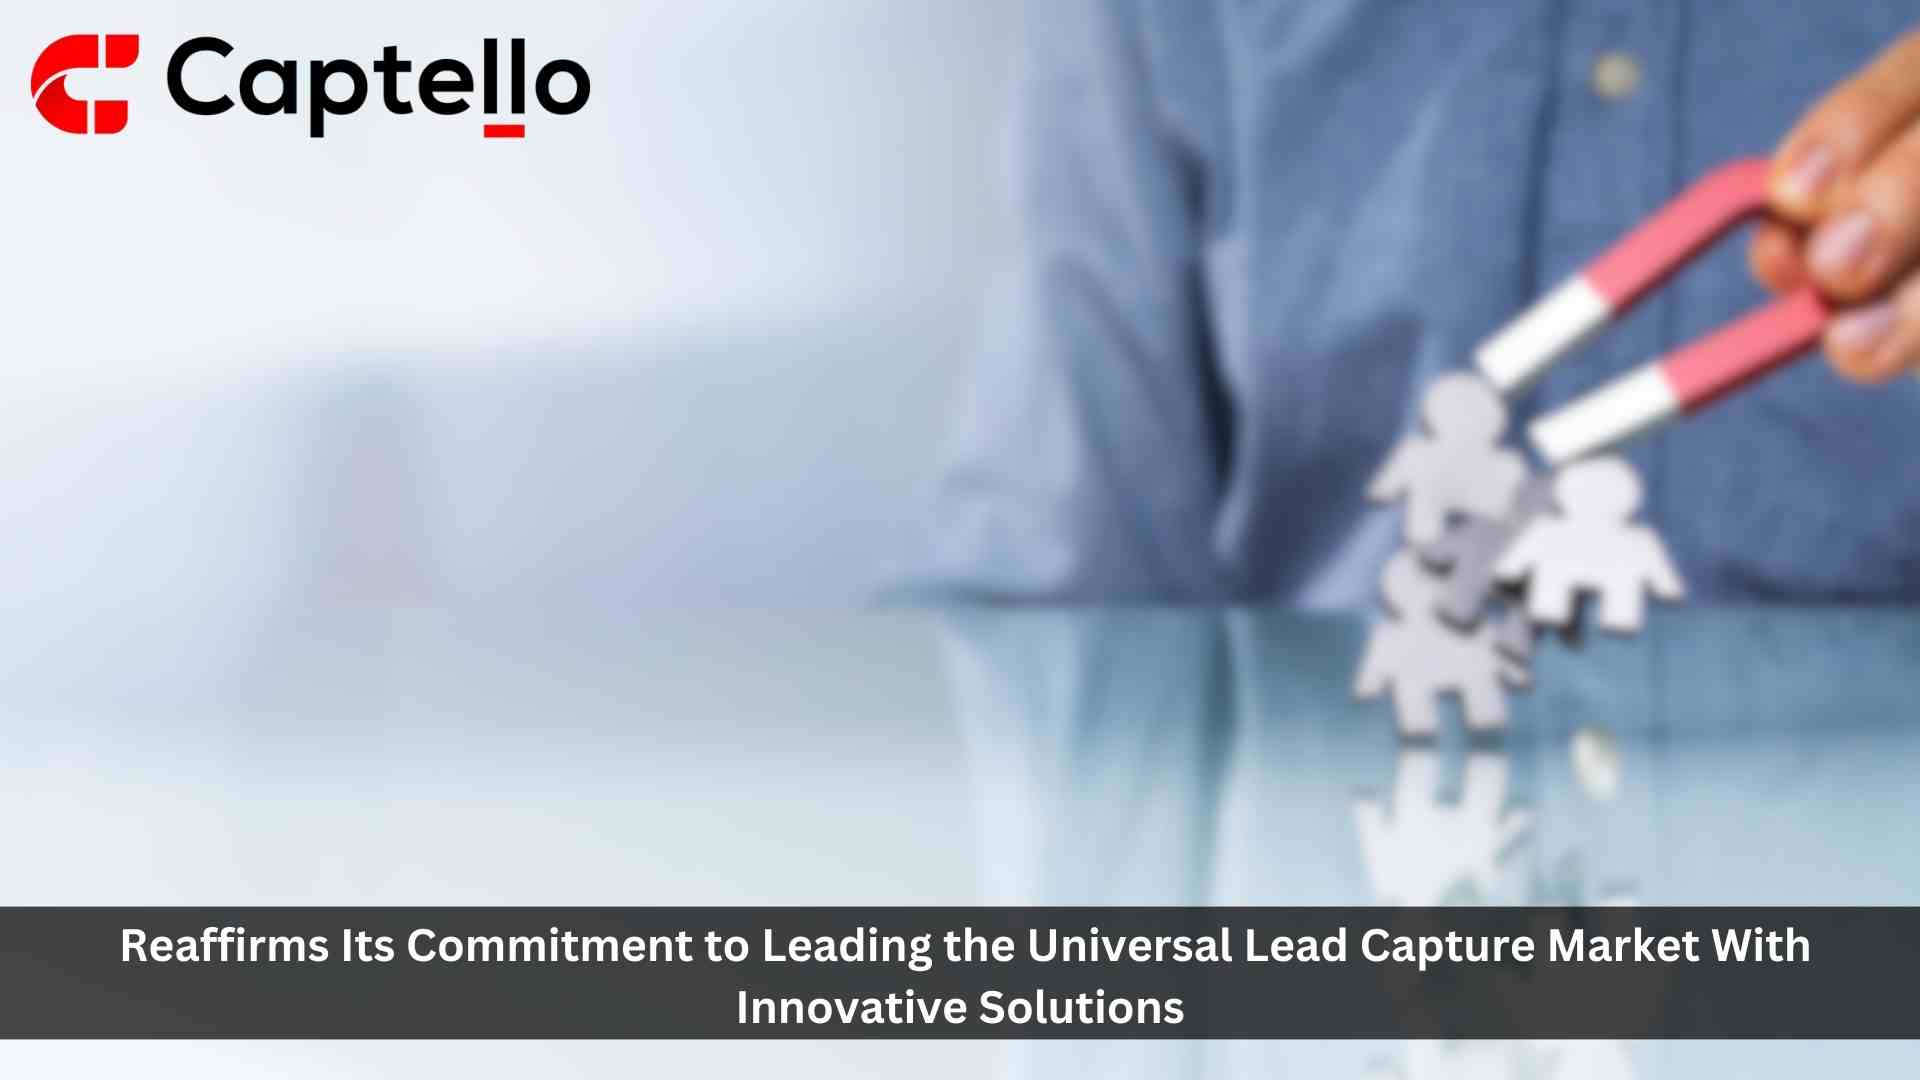 Captello Reinforces Market Leadership as Event Industry Consolidates with Cvent's Acquisition of iCapture and Jifflenow